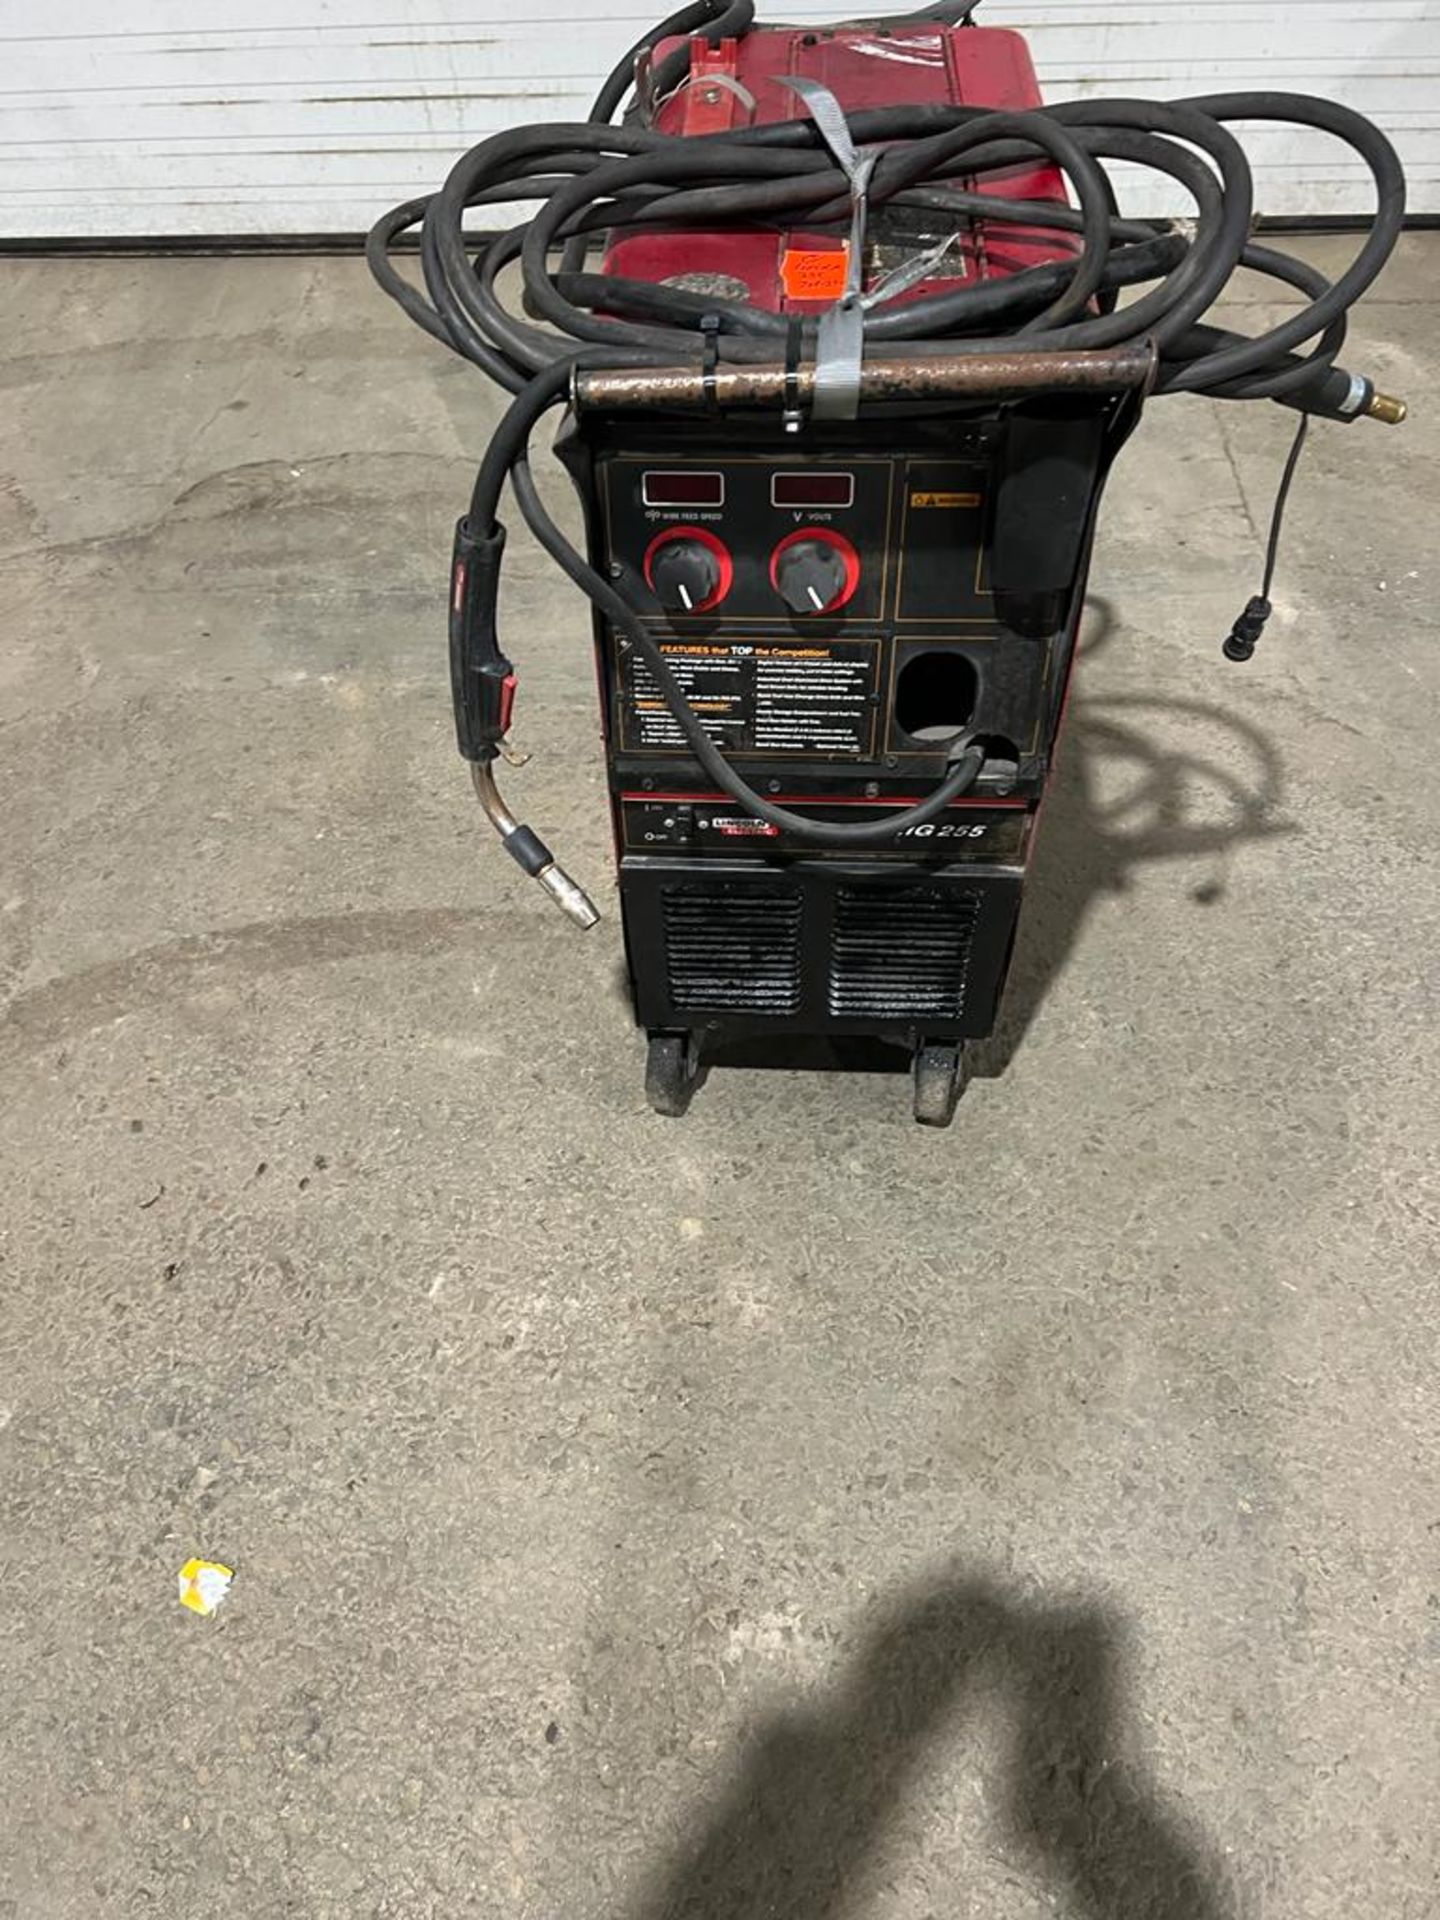 Lincoln Power Mig 255 Mig Welder with Built in Wire Feeder and gun 208/230V COMPLETE